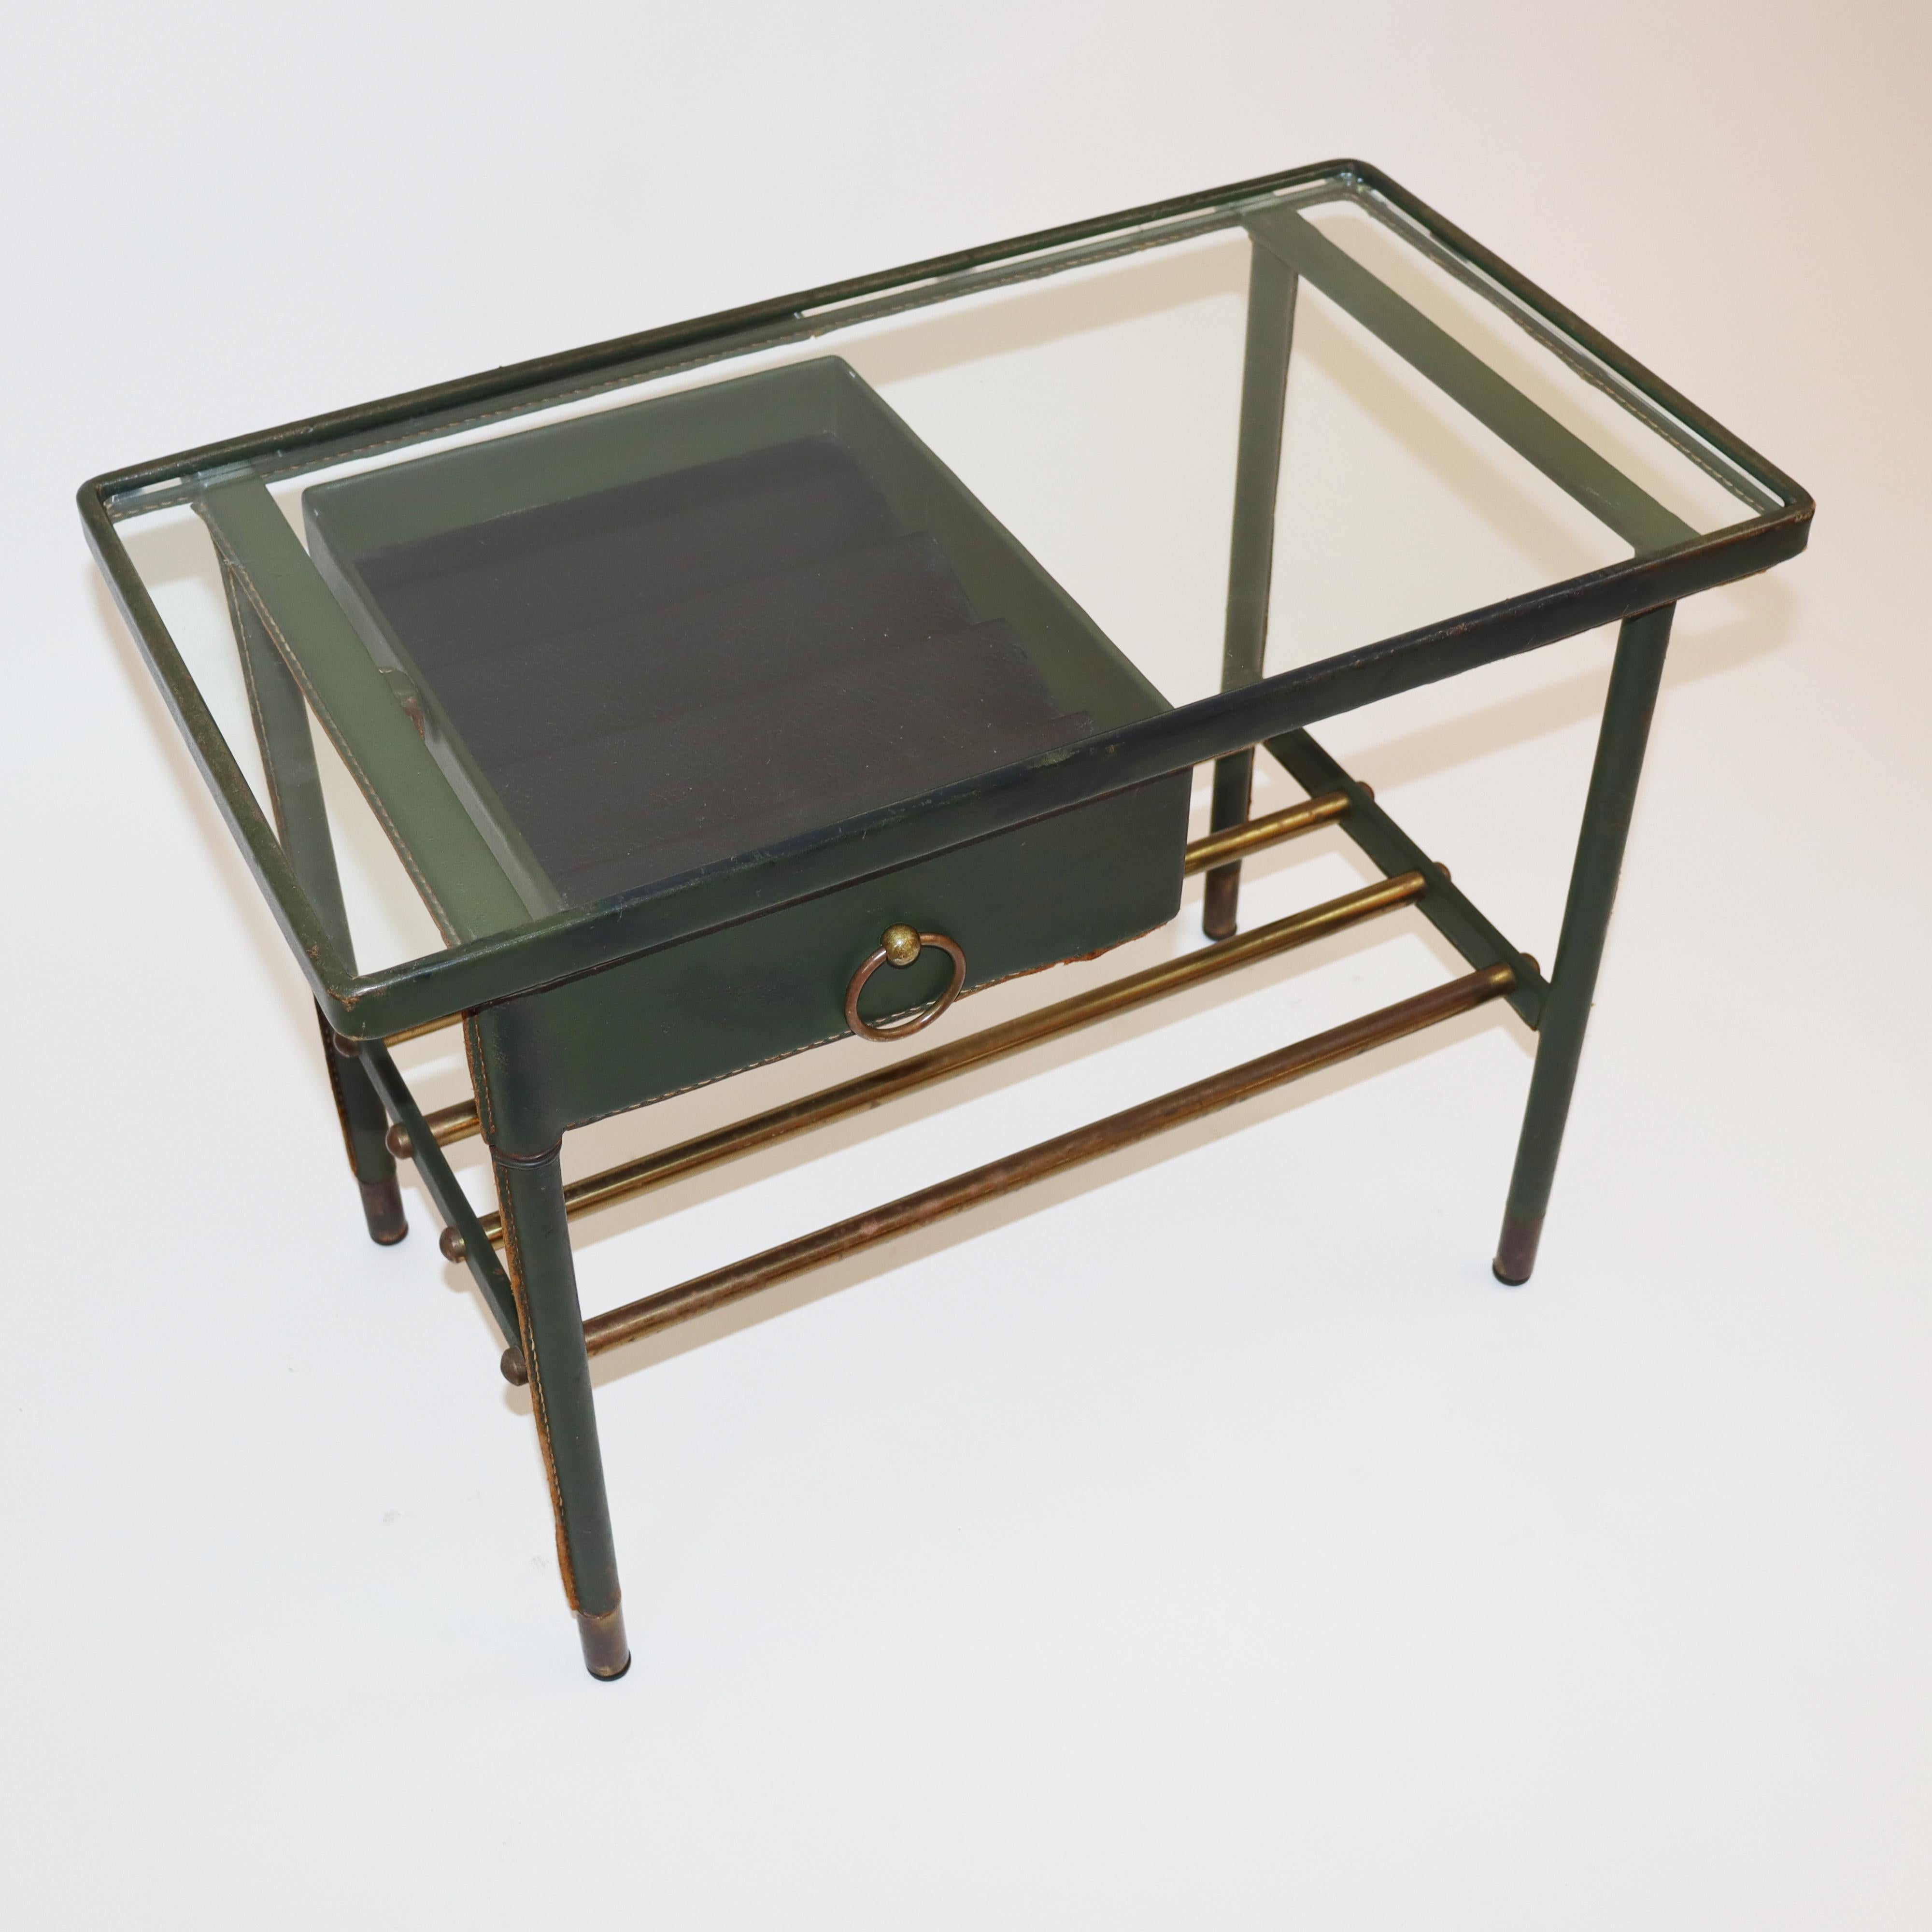 Jacques Adnet Handstitched Green Leather Nightstand, 1950s, France For Sale 2